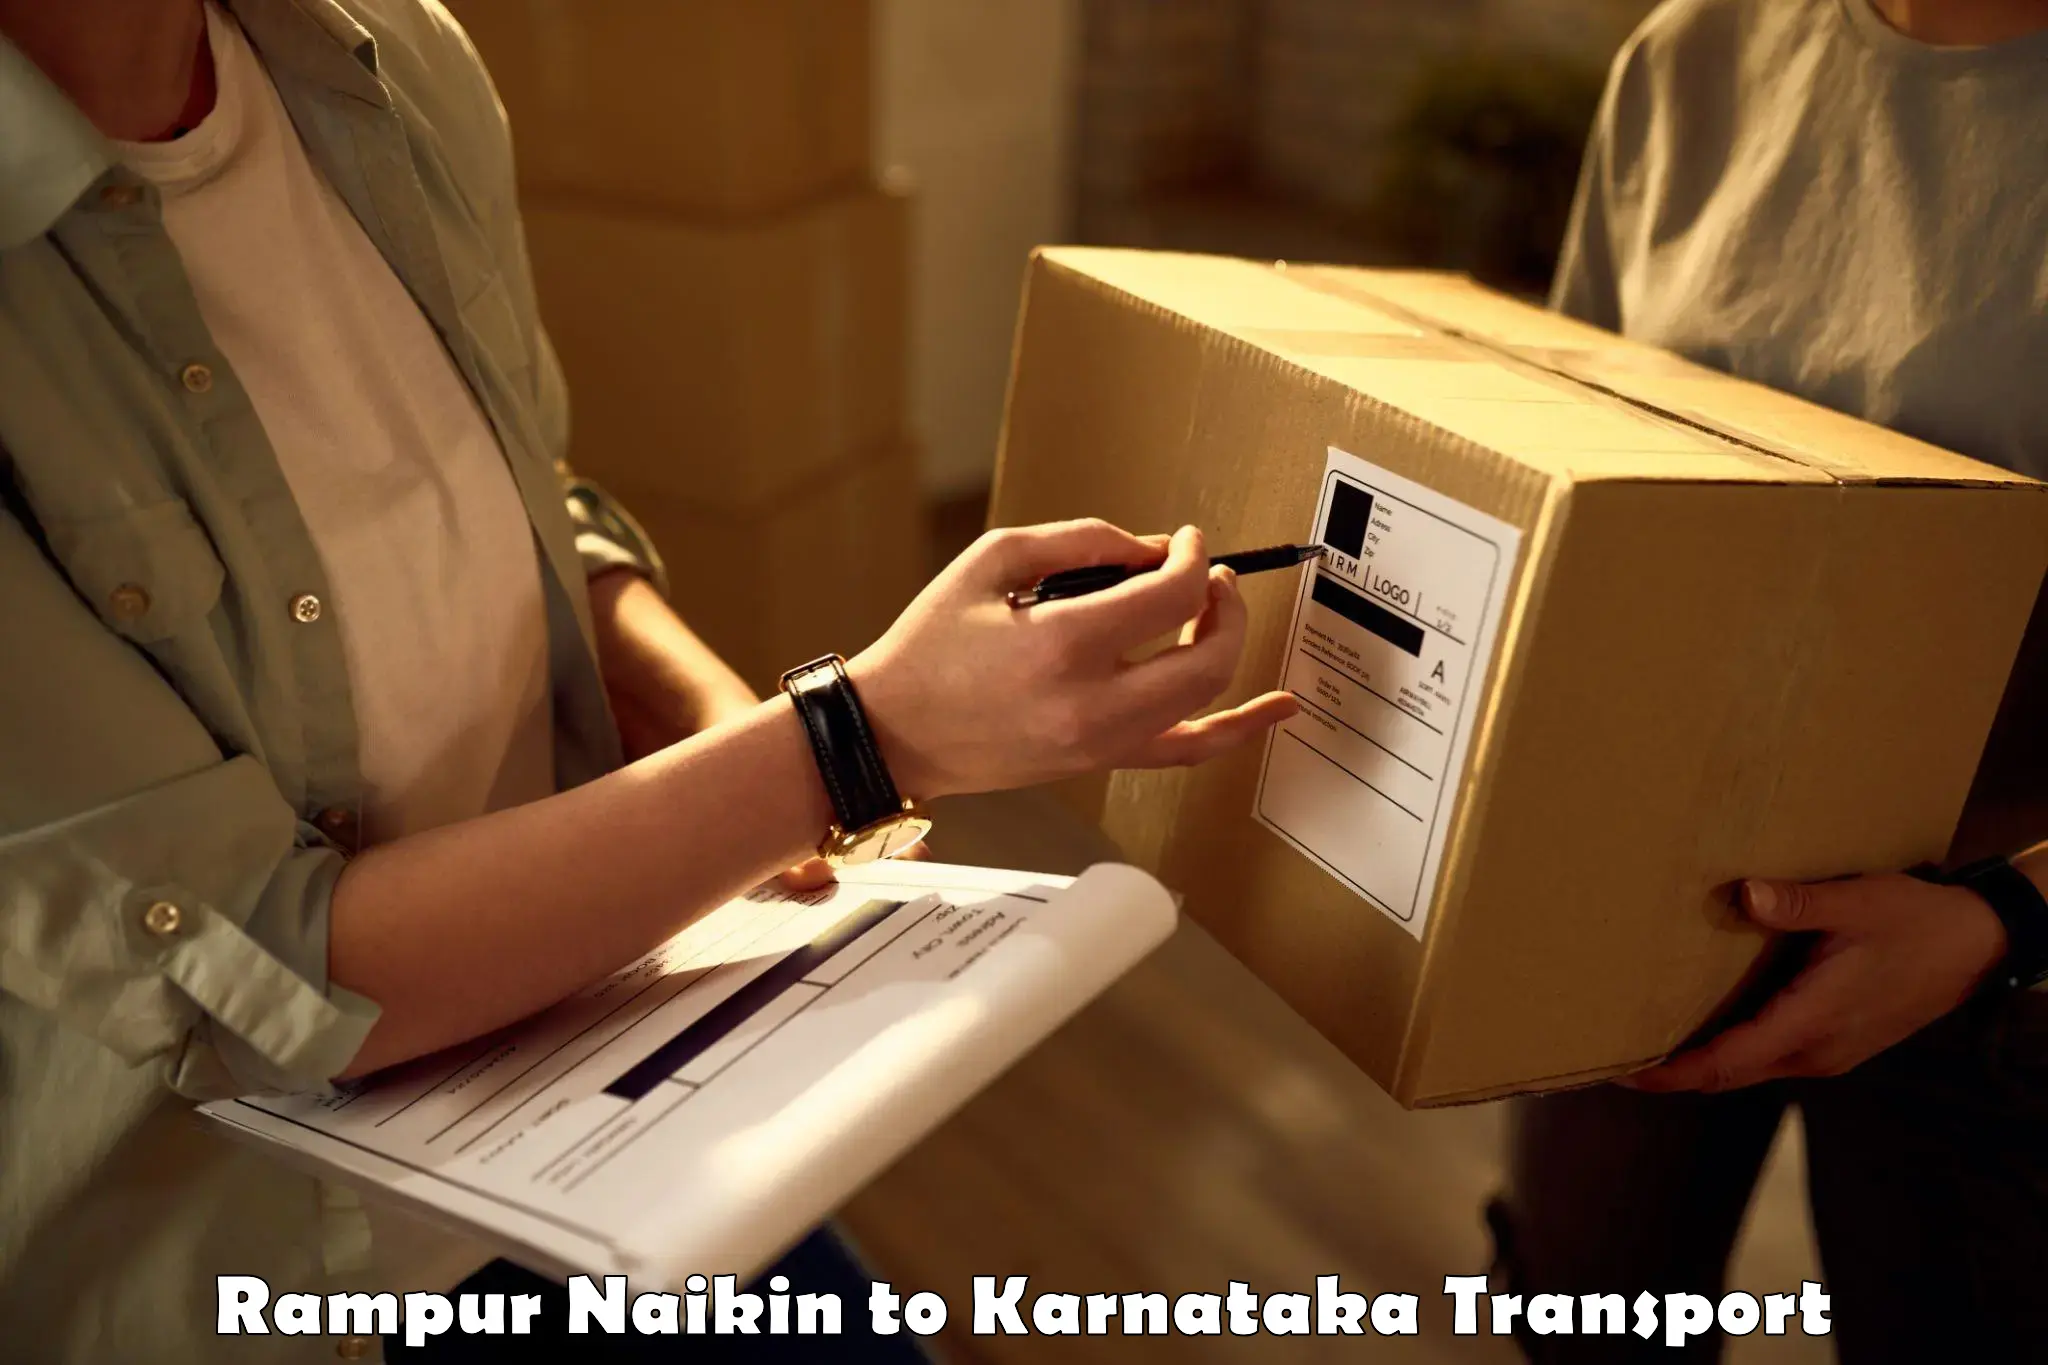 Online transport Rampur Naikin to Manipal Academy of Higher Education